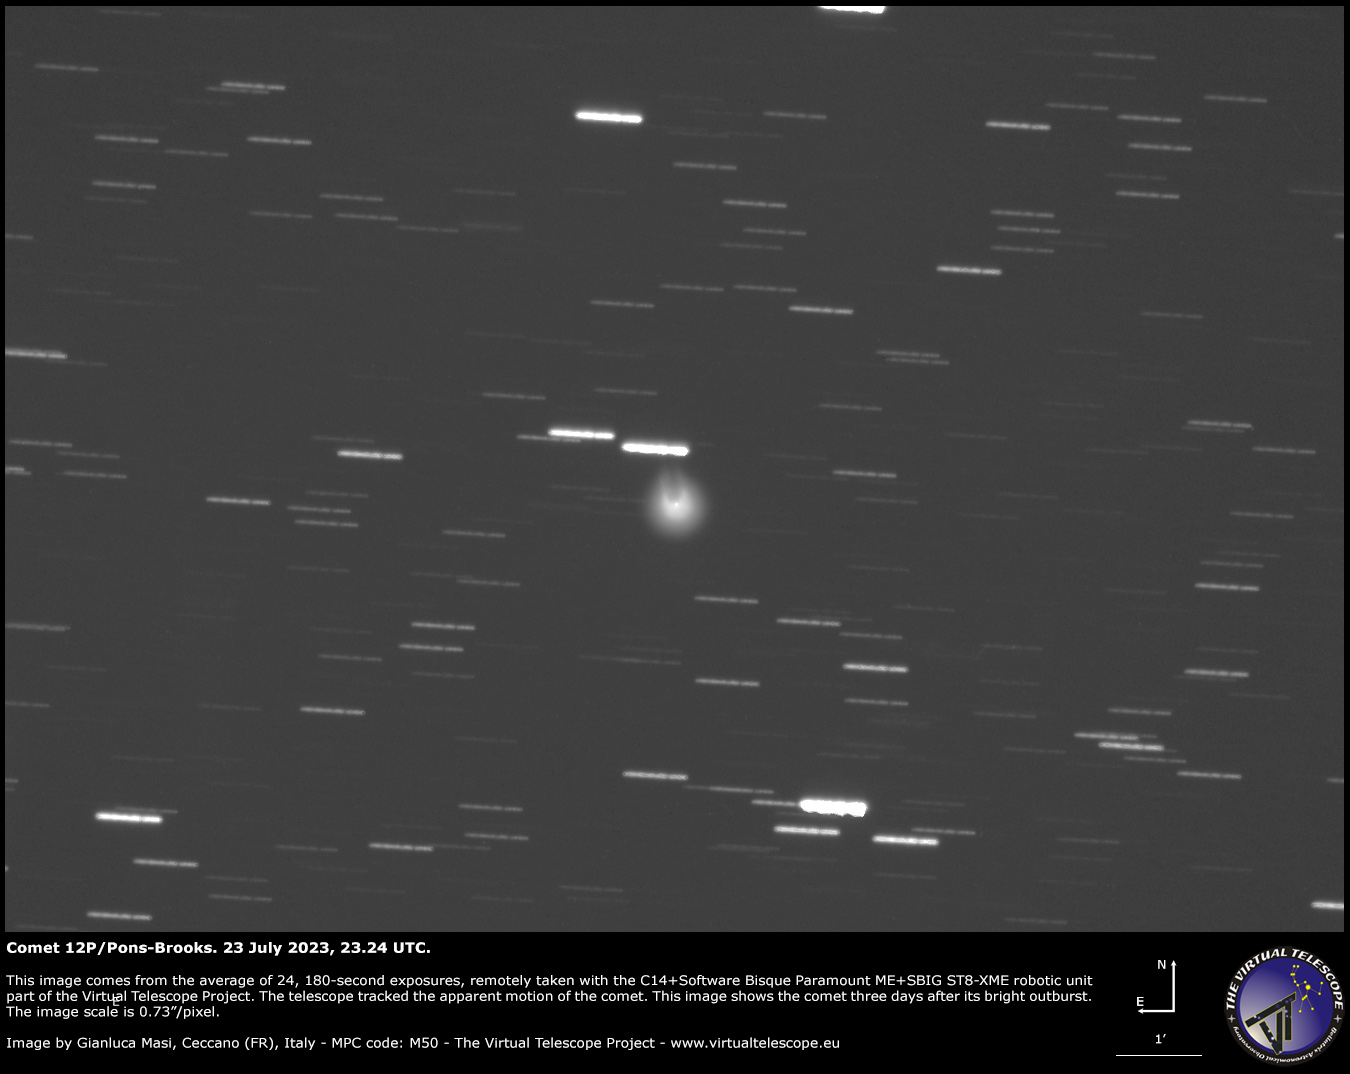 Comet 12P/Pons-Brooks in outburst: 23 July 2023.